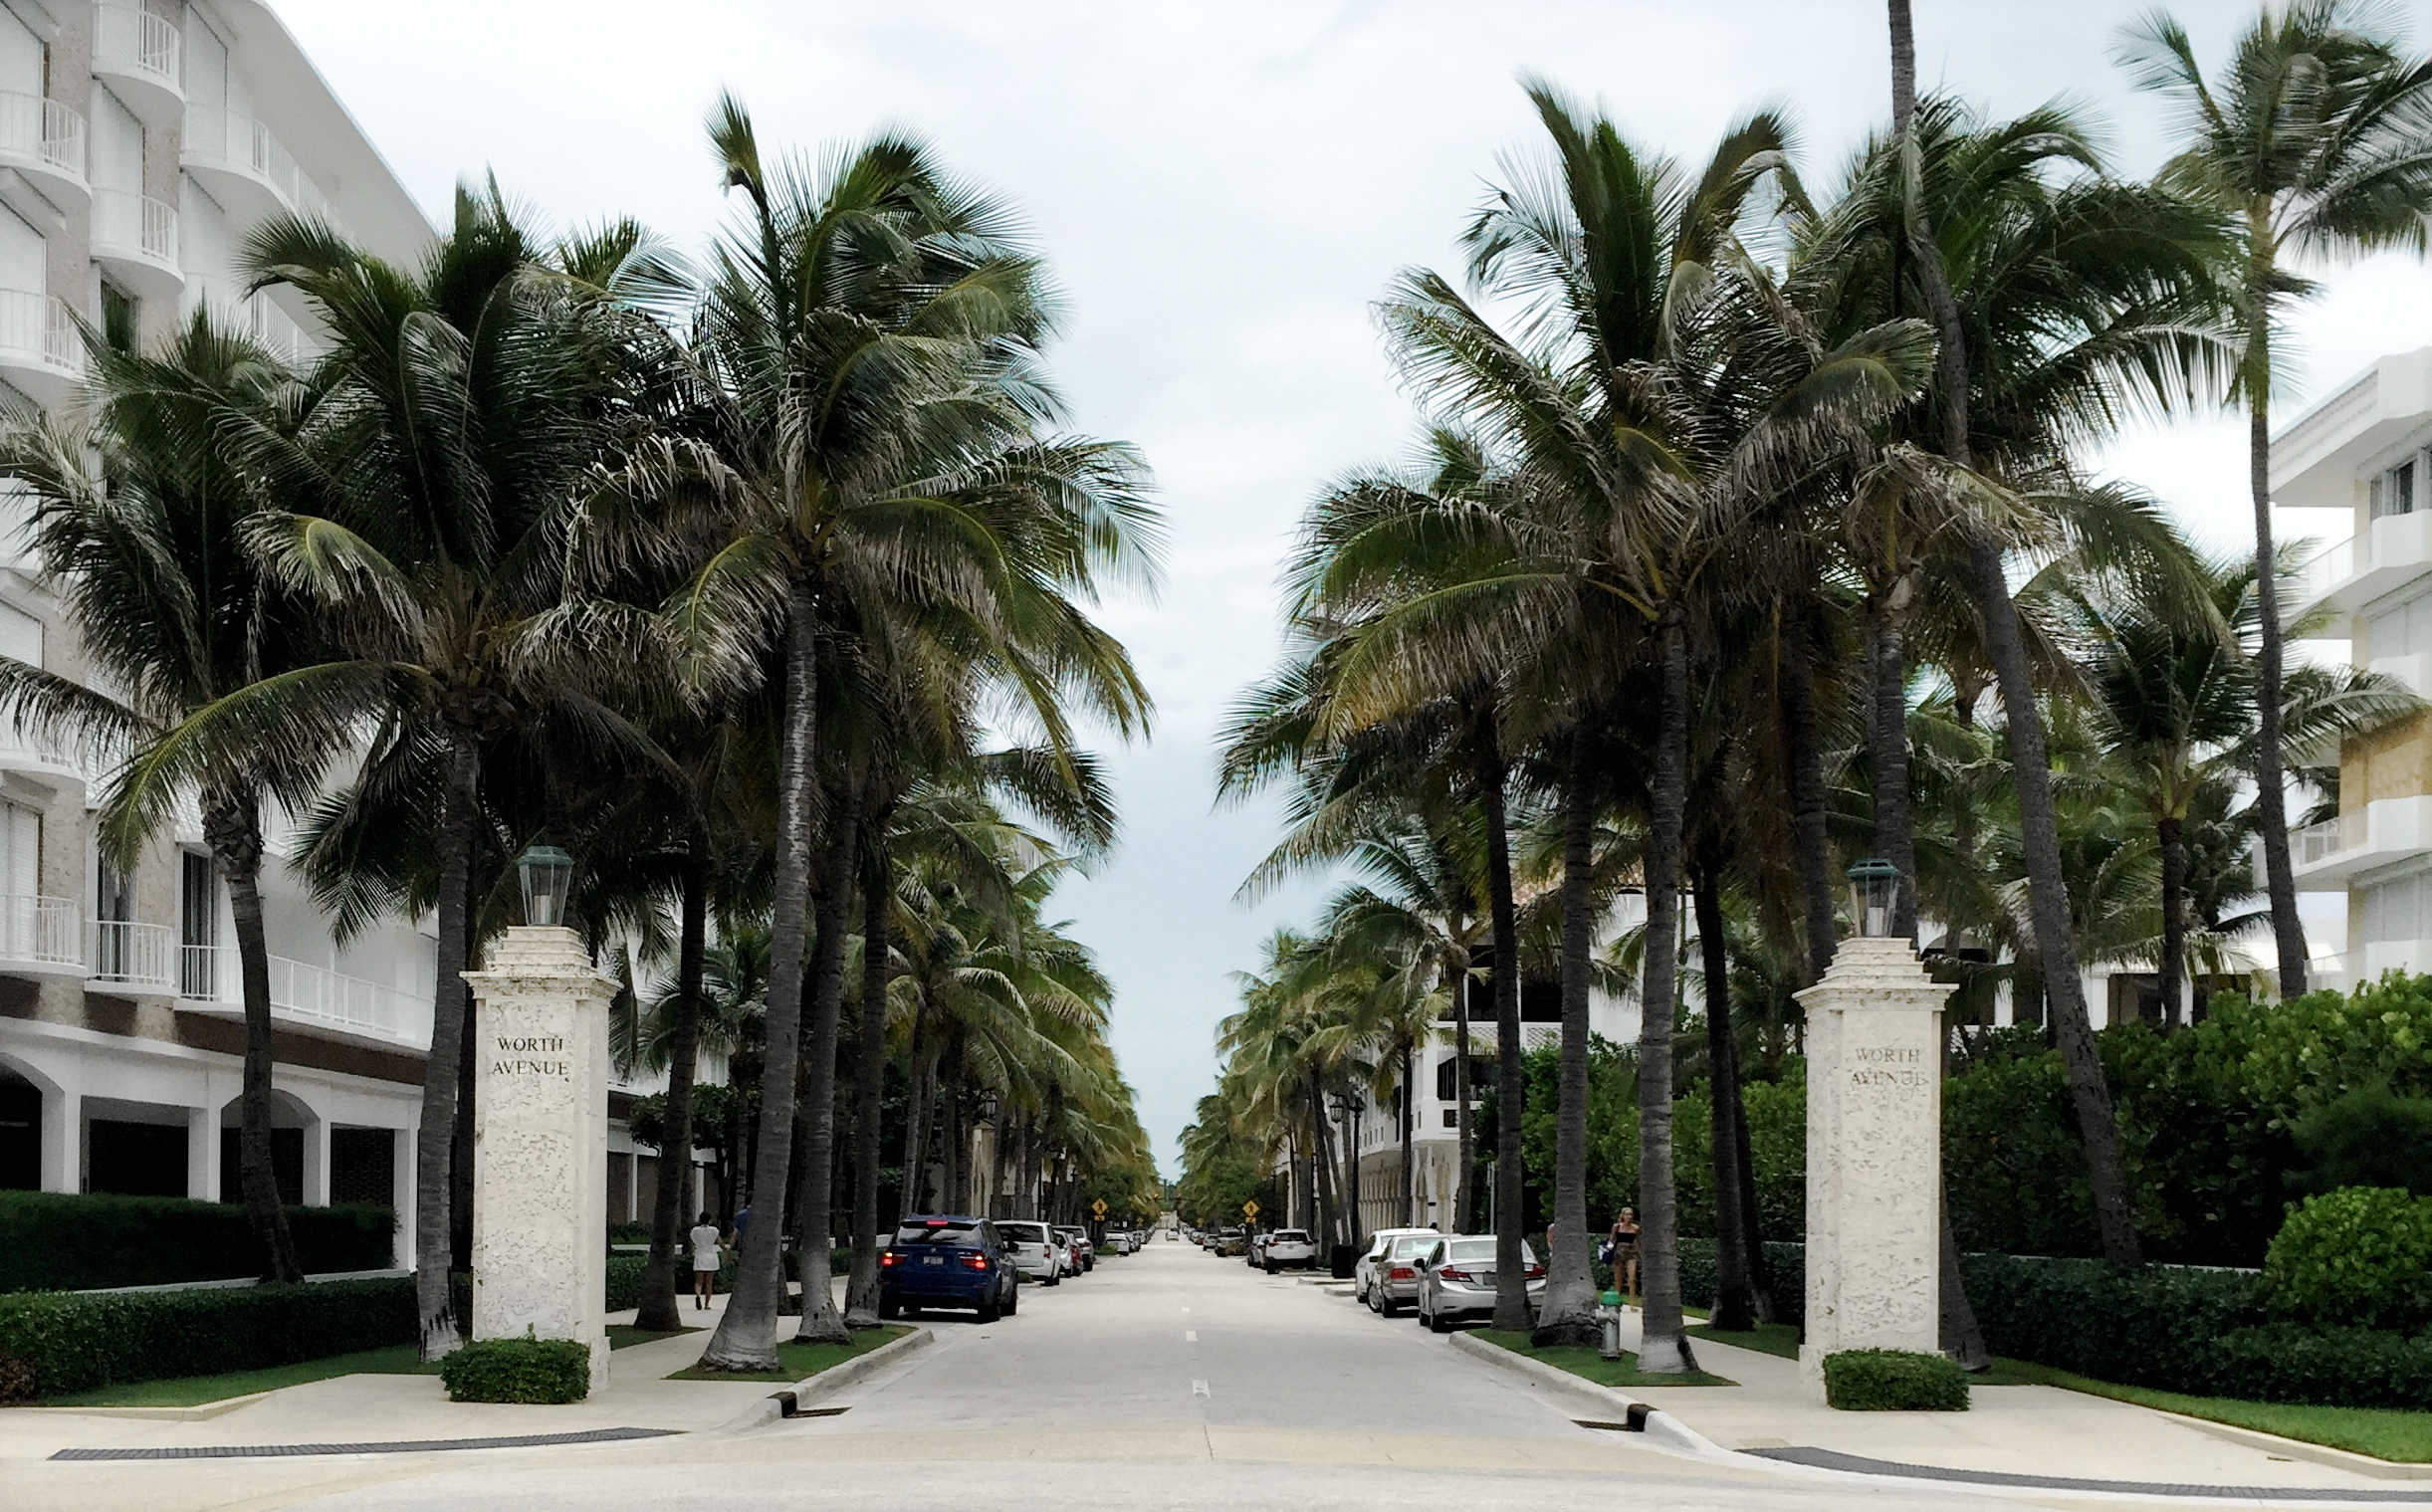 Street View - Limestone columns and palm trees - Worth Ave